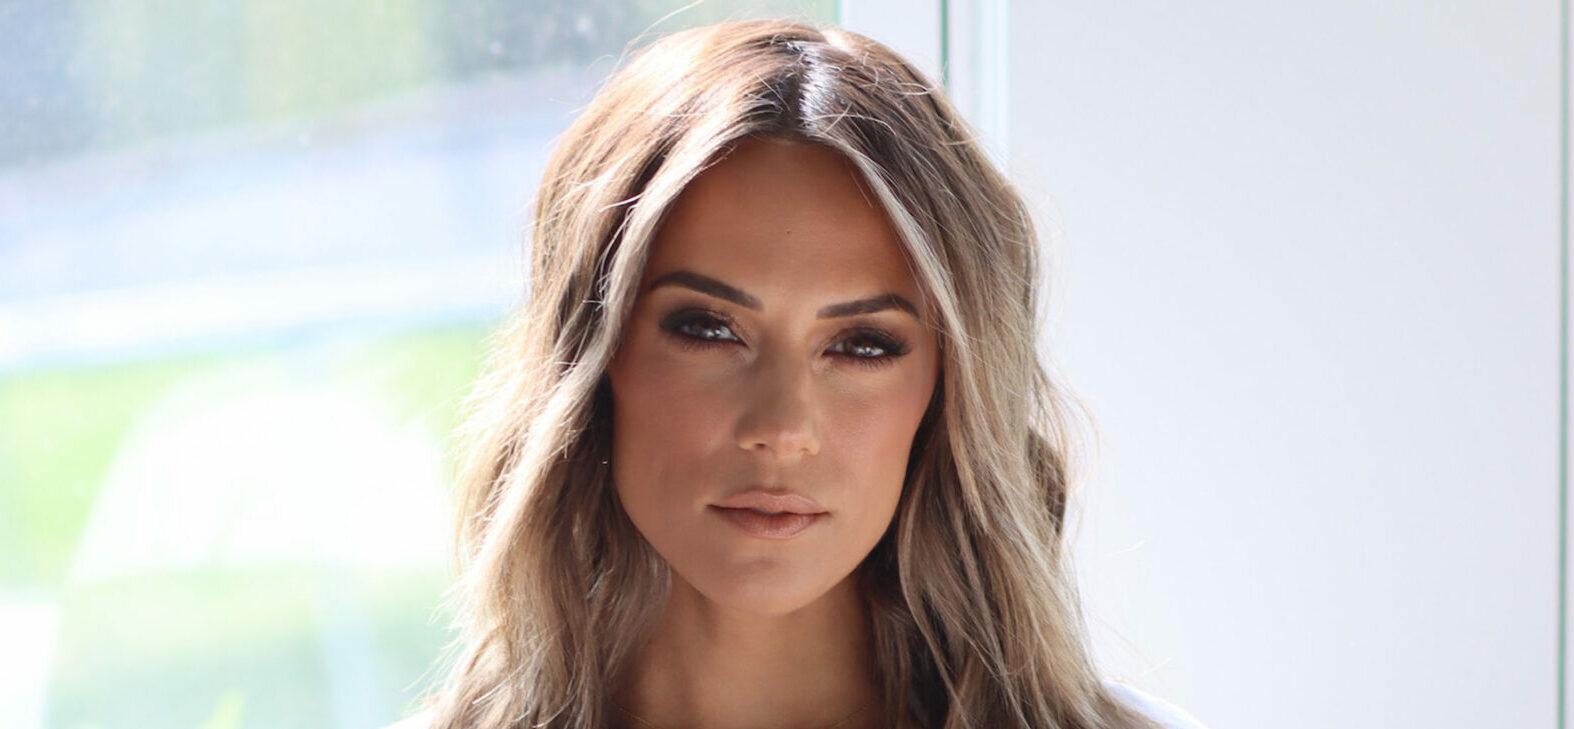 Jana Kramer Reveals She Felt Broken After Miscarriages And Questioned Her Womanhood